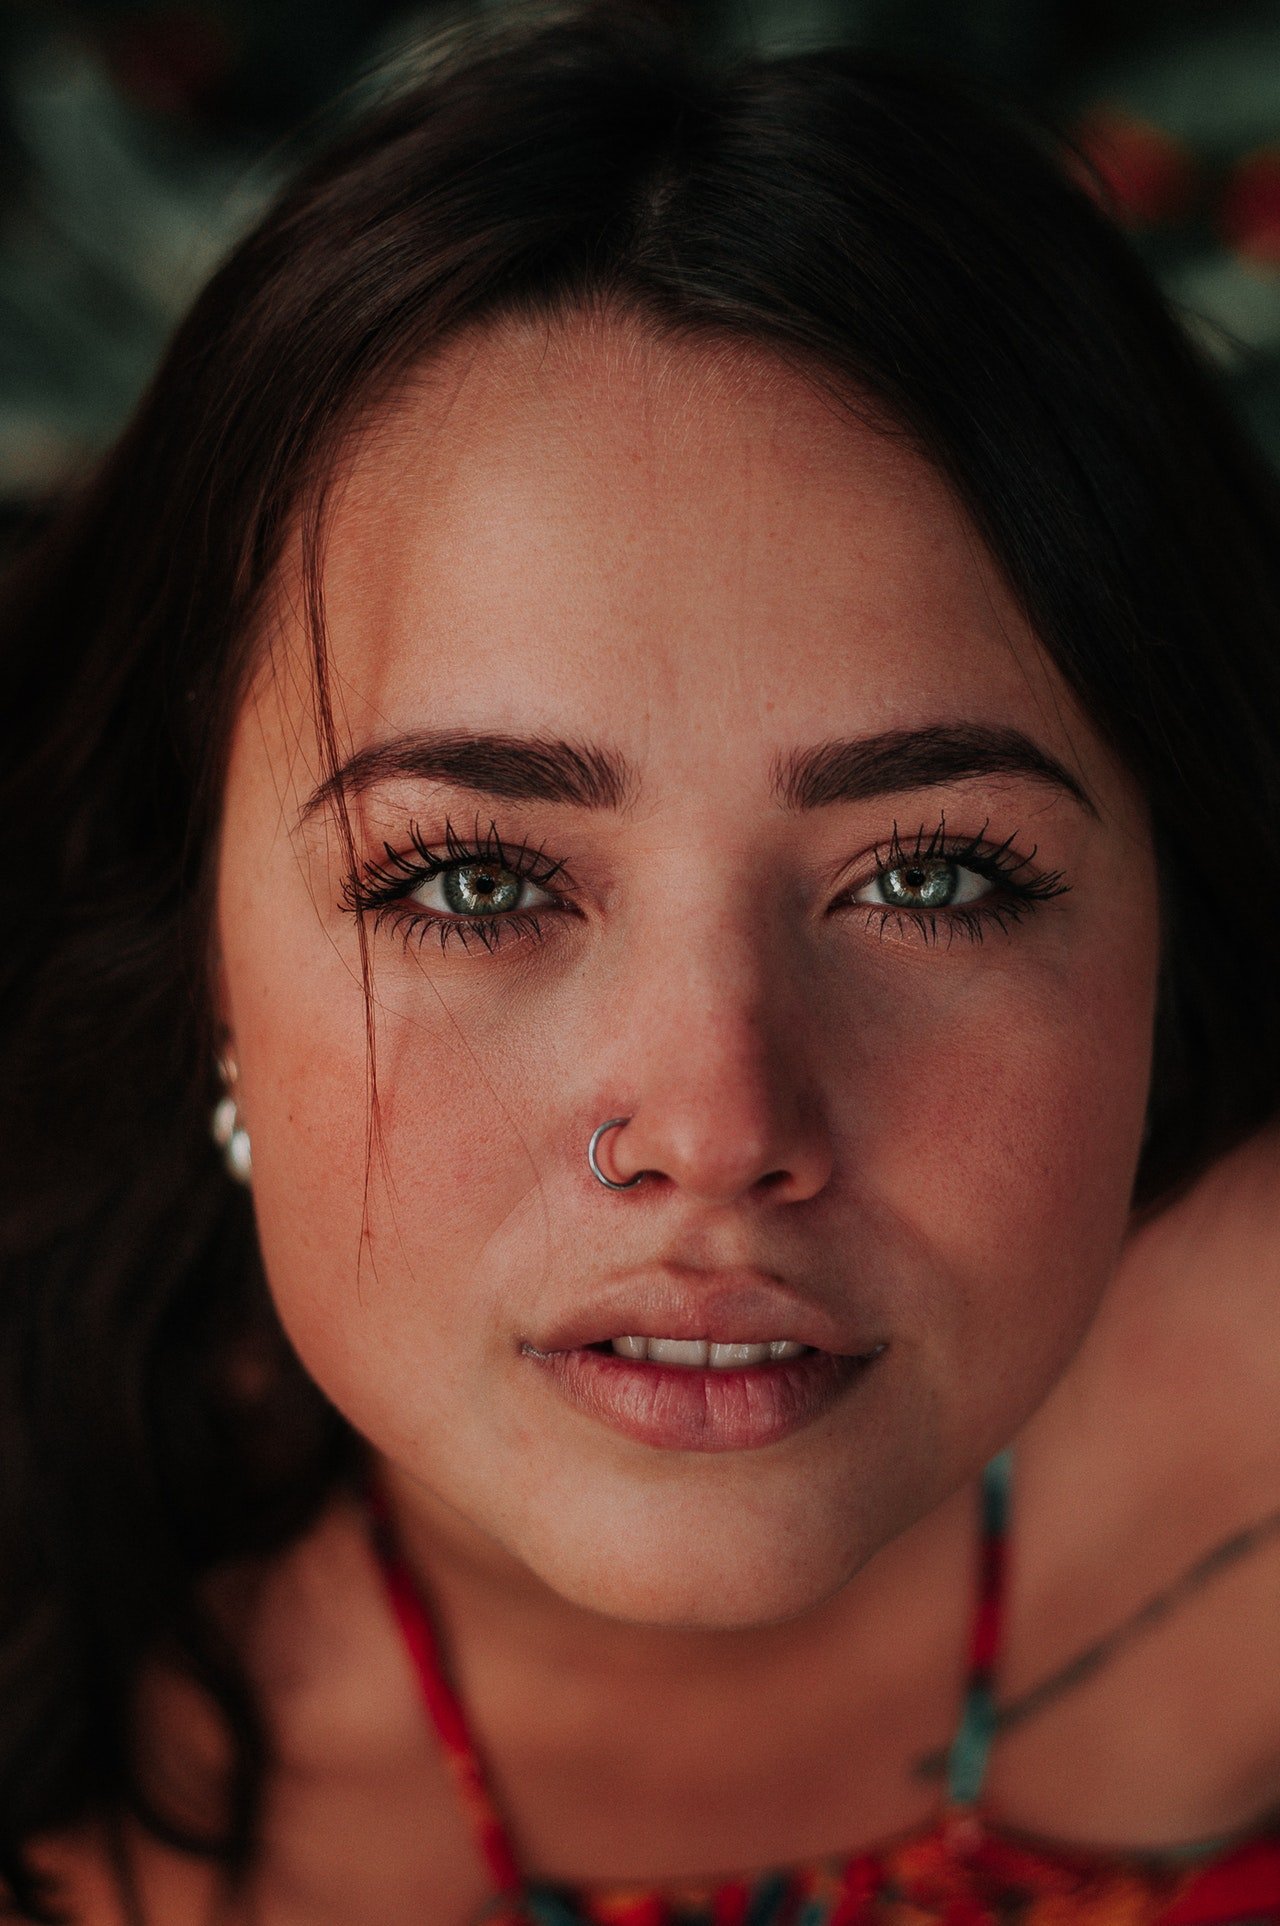 Photo of a woman with a nose piercing | Photo: Pexels